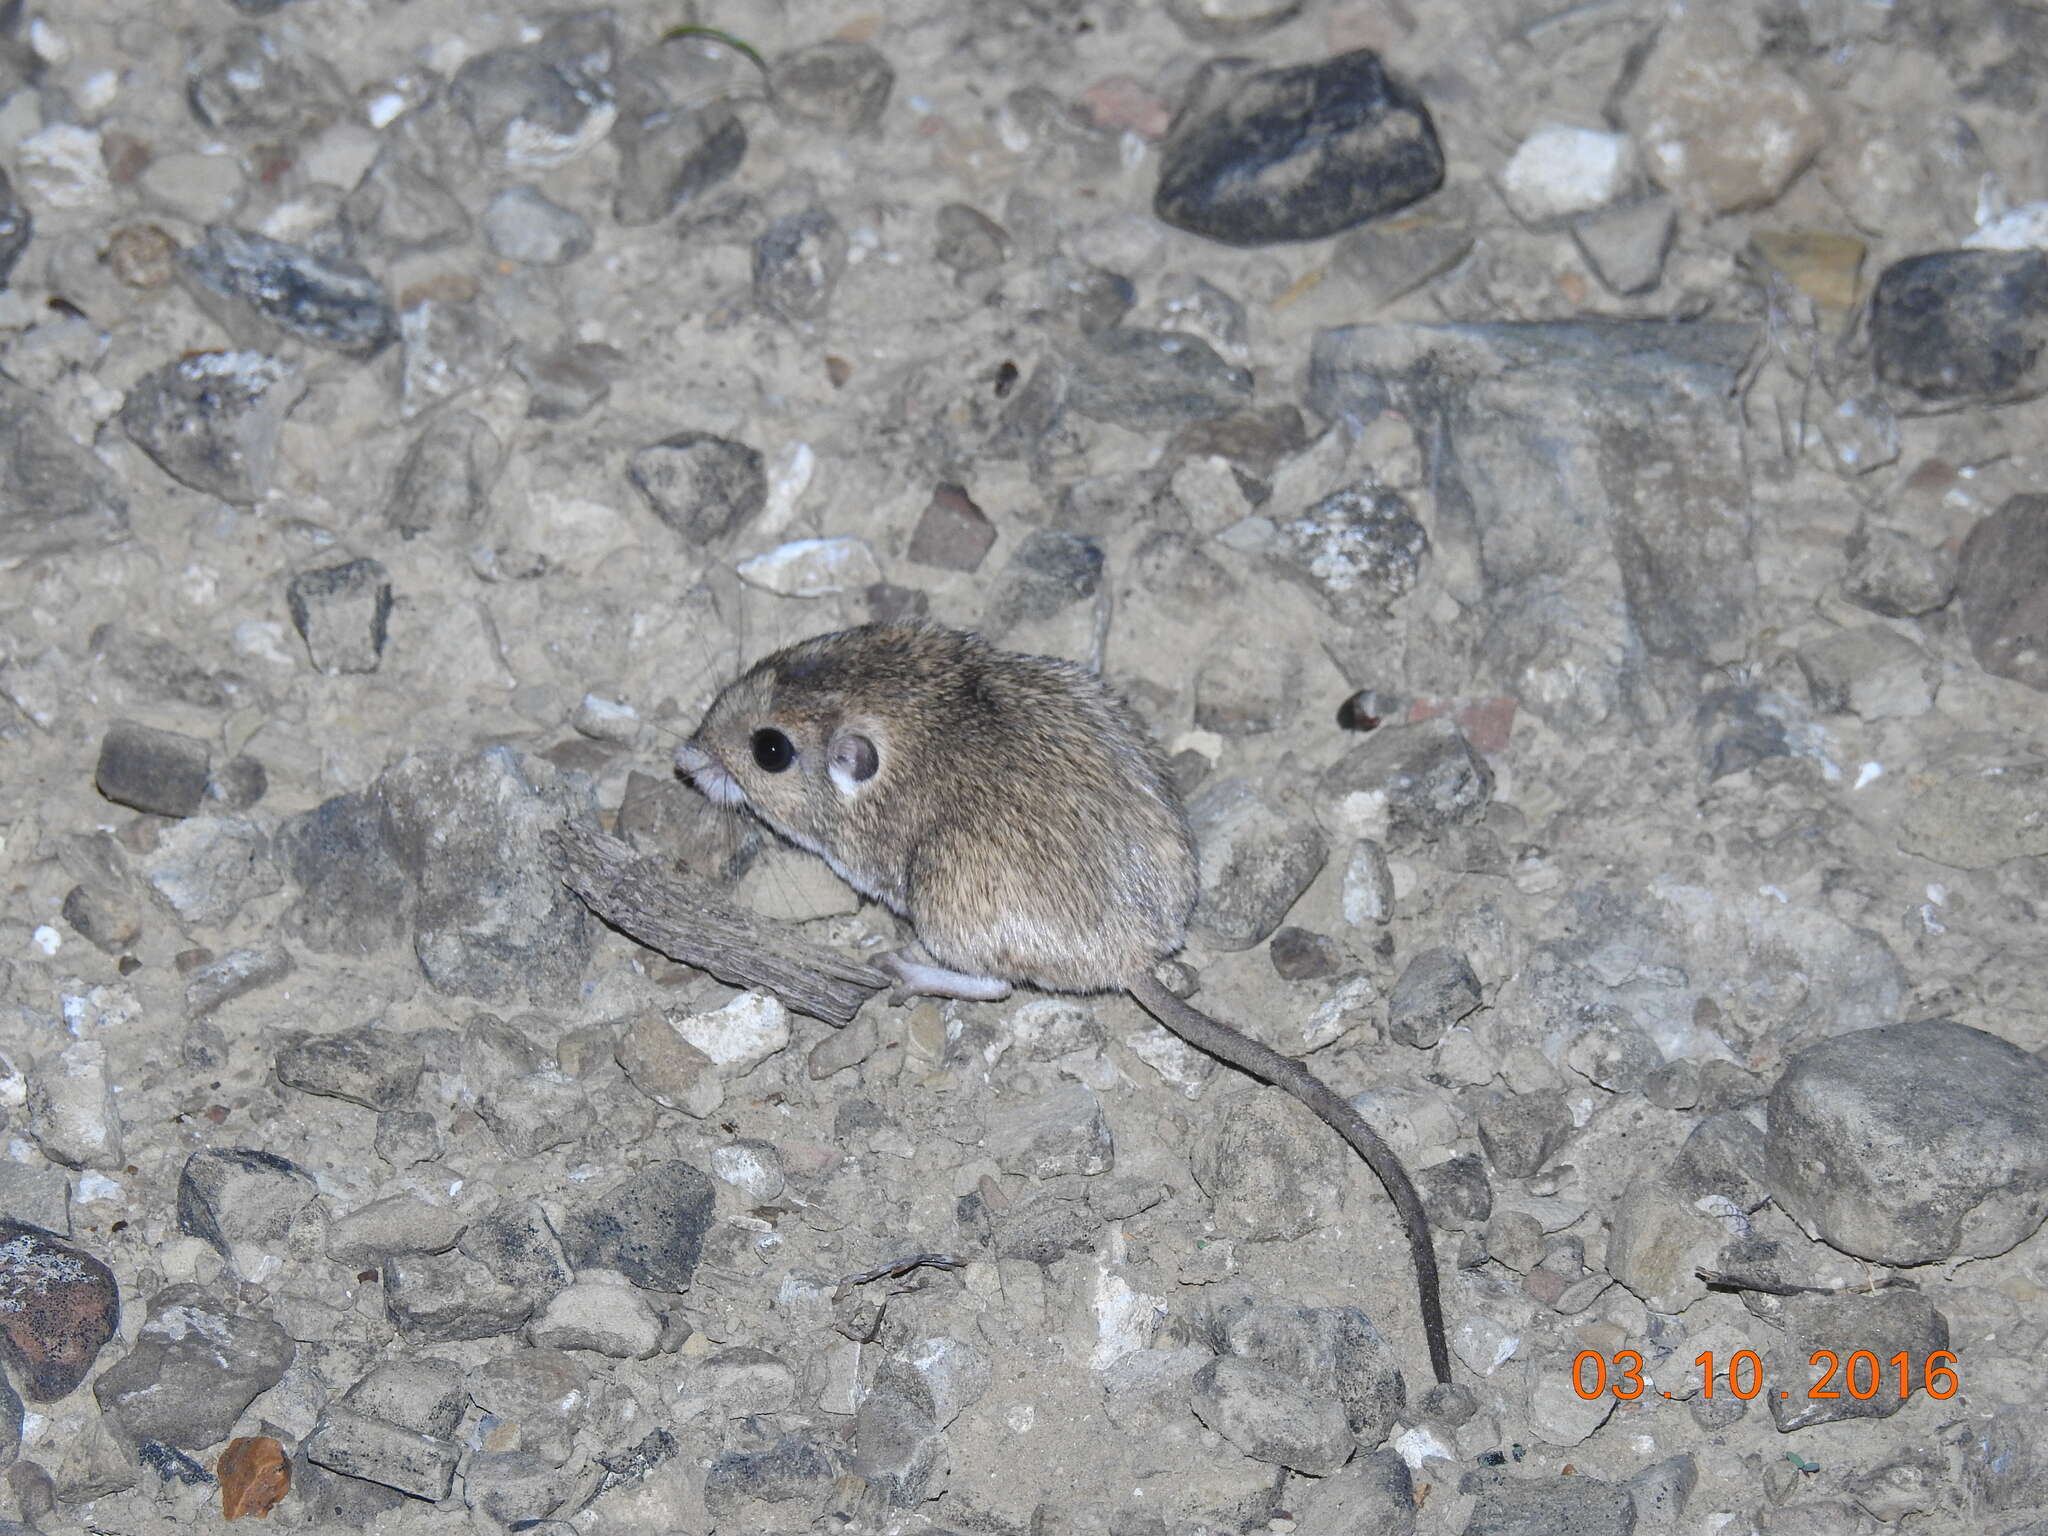 Image of Merriam's pocket mouse